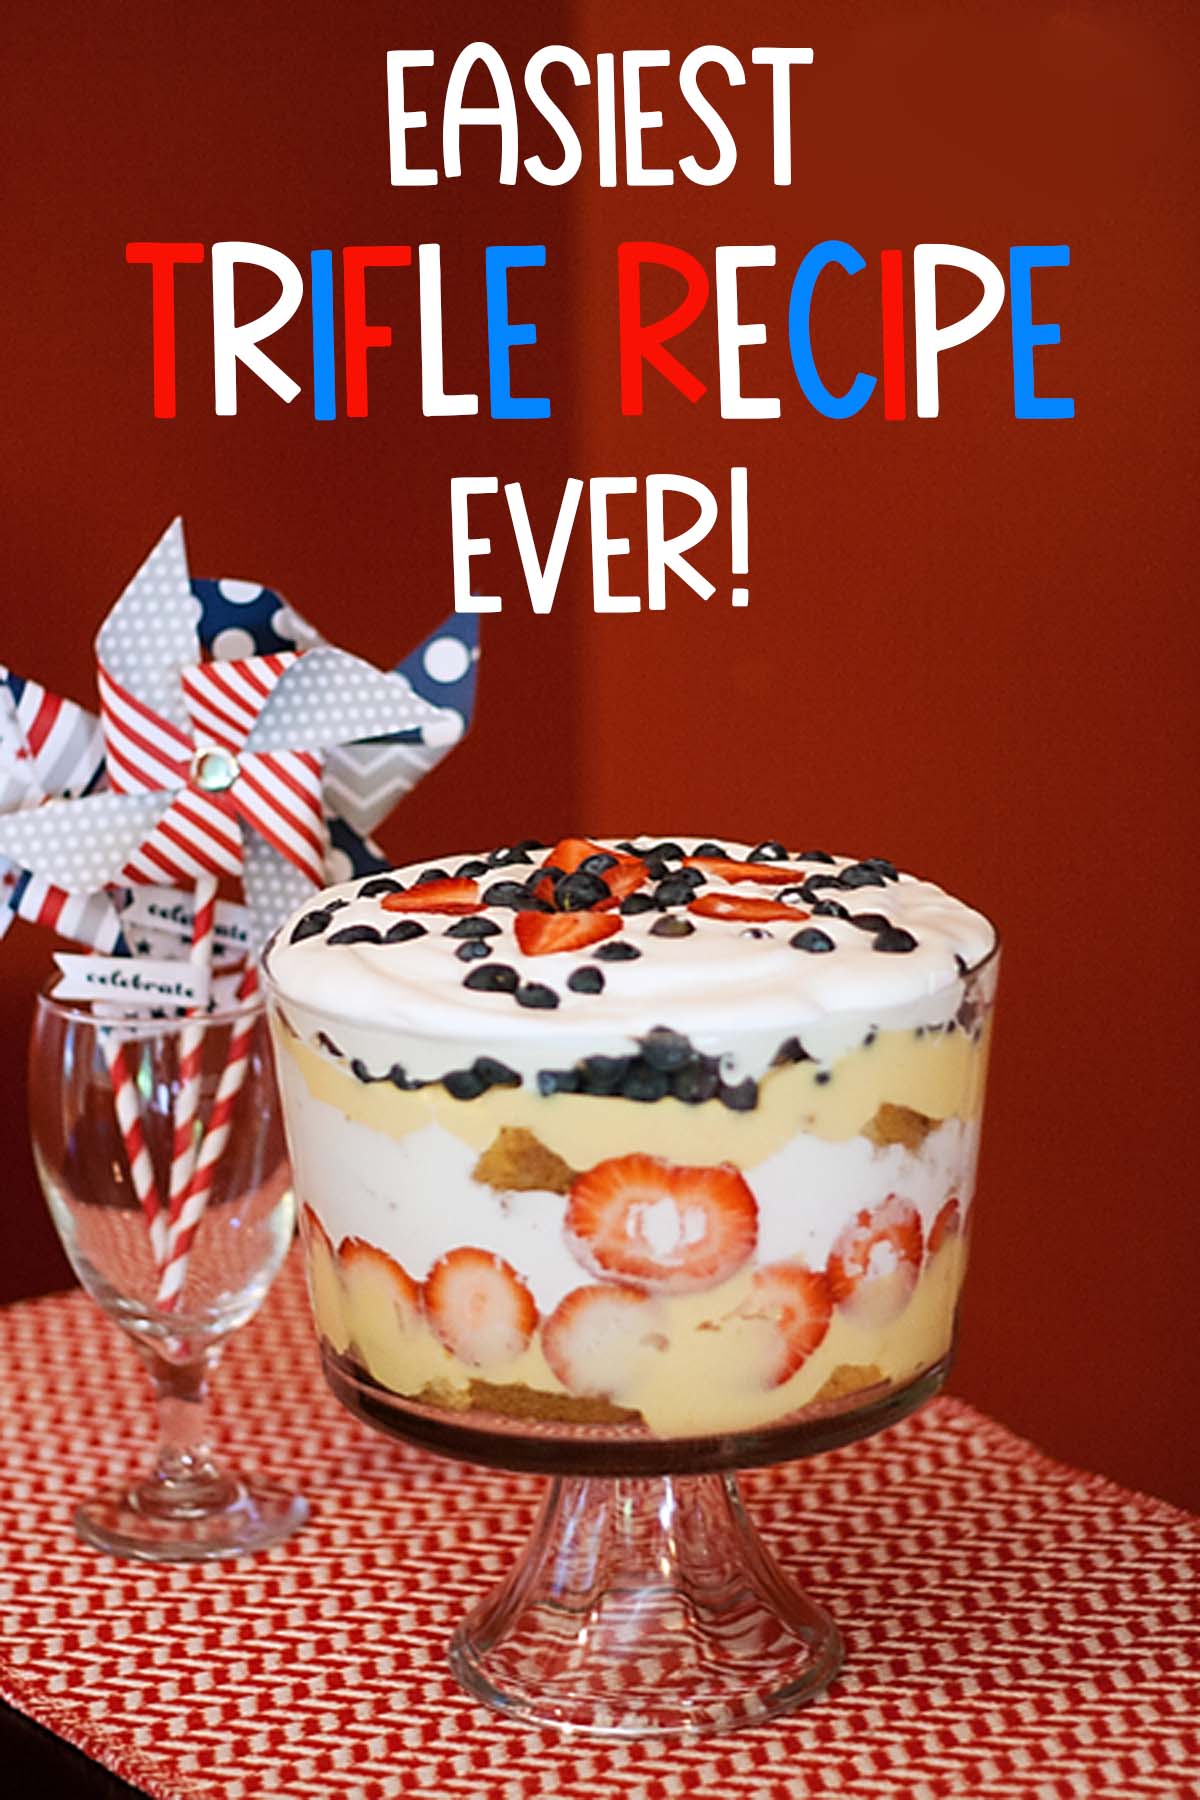 How to Make the Perfect Trifle (Without Making it From Scratch) via @lara_neves